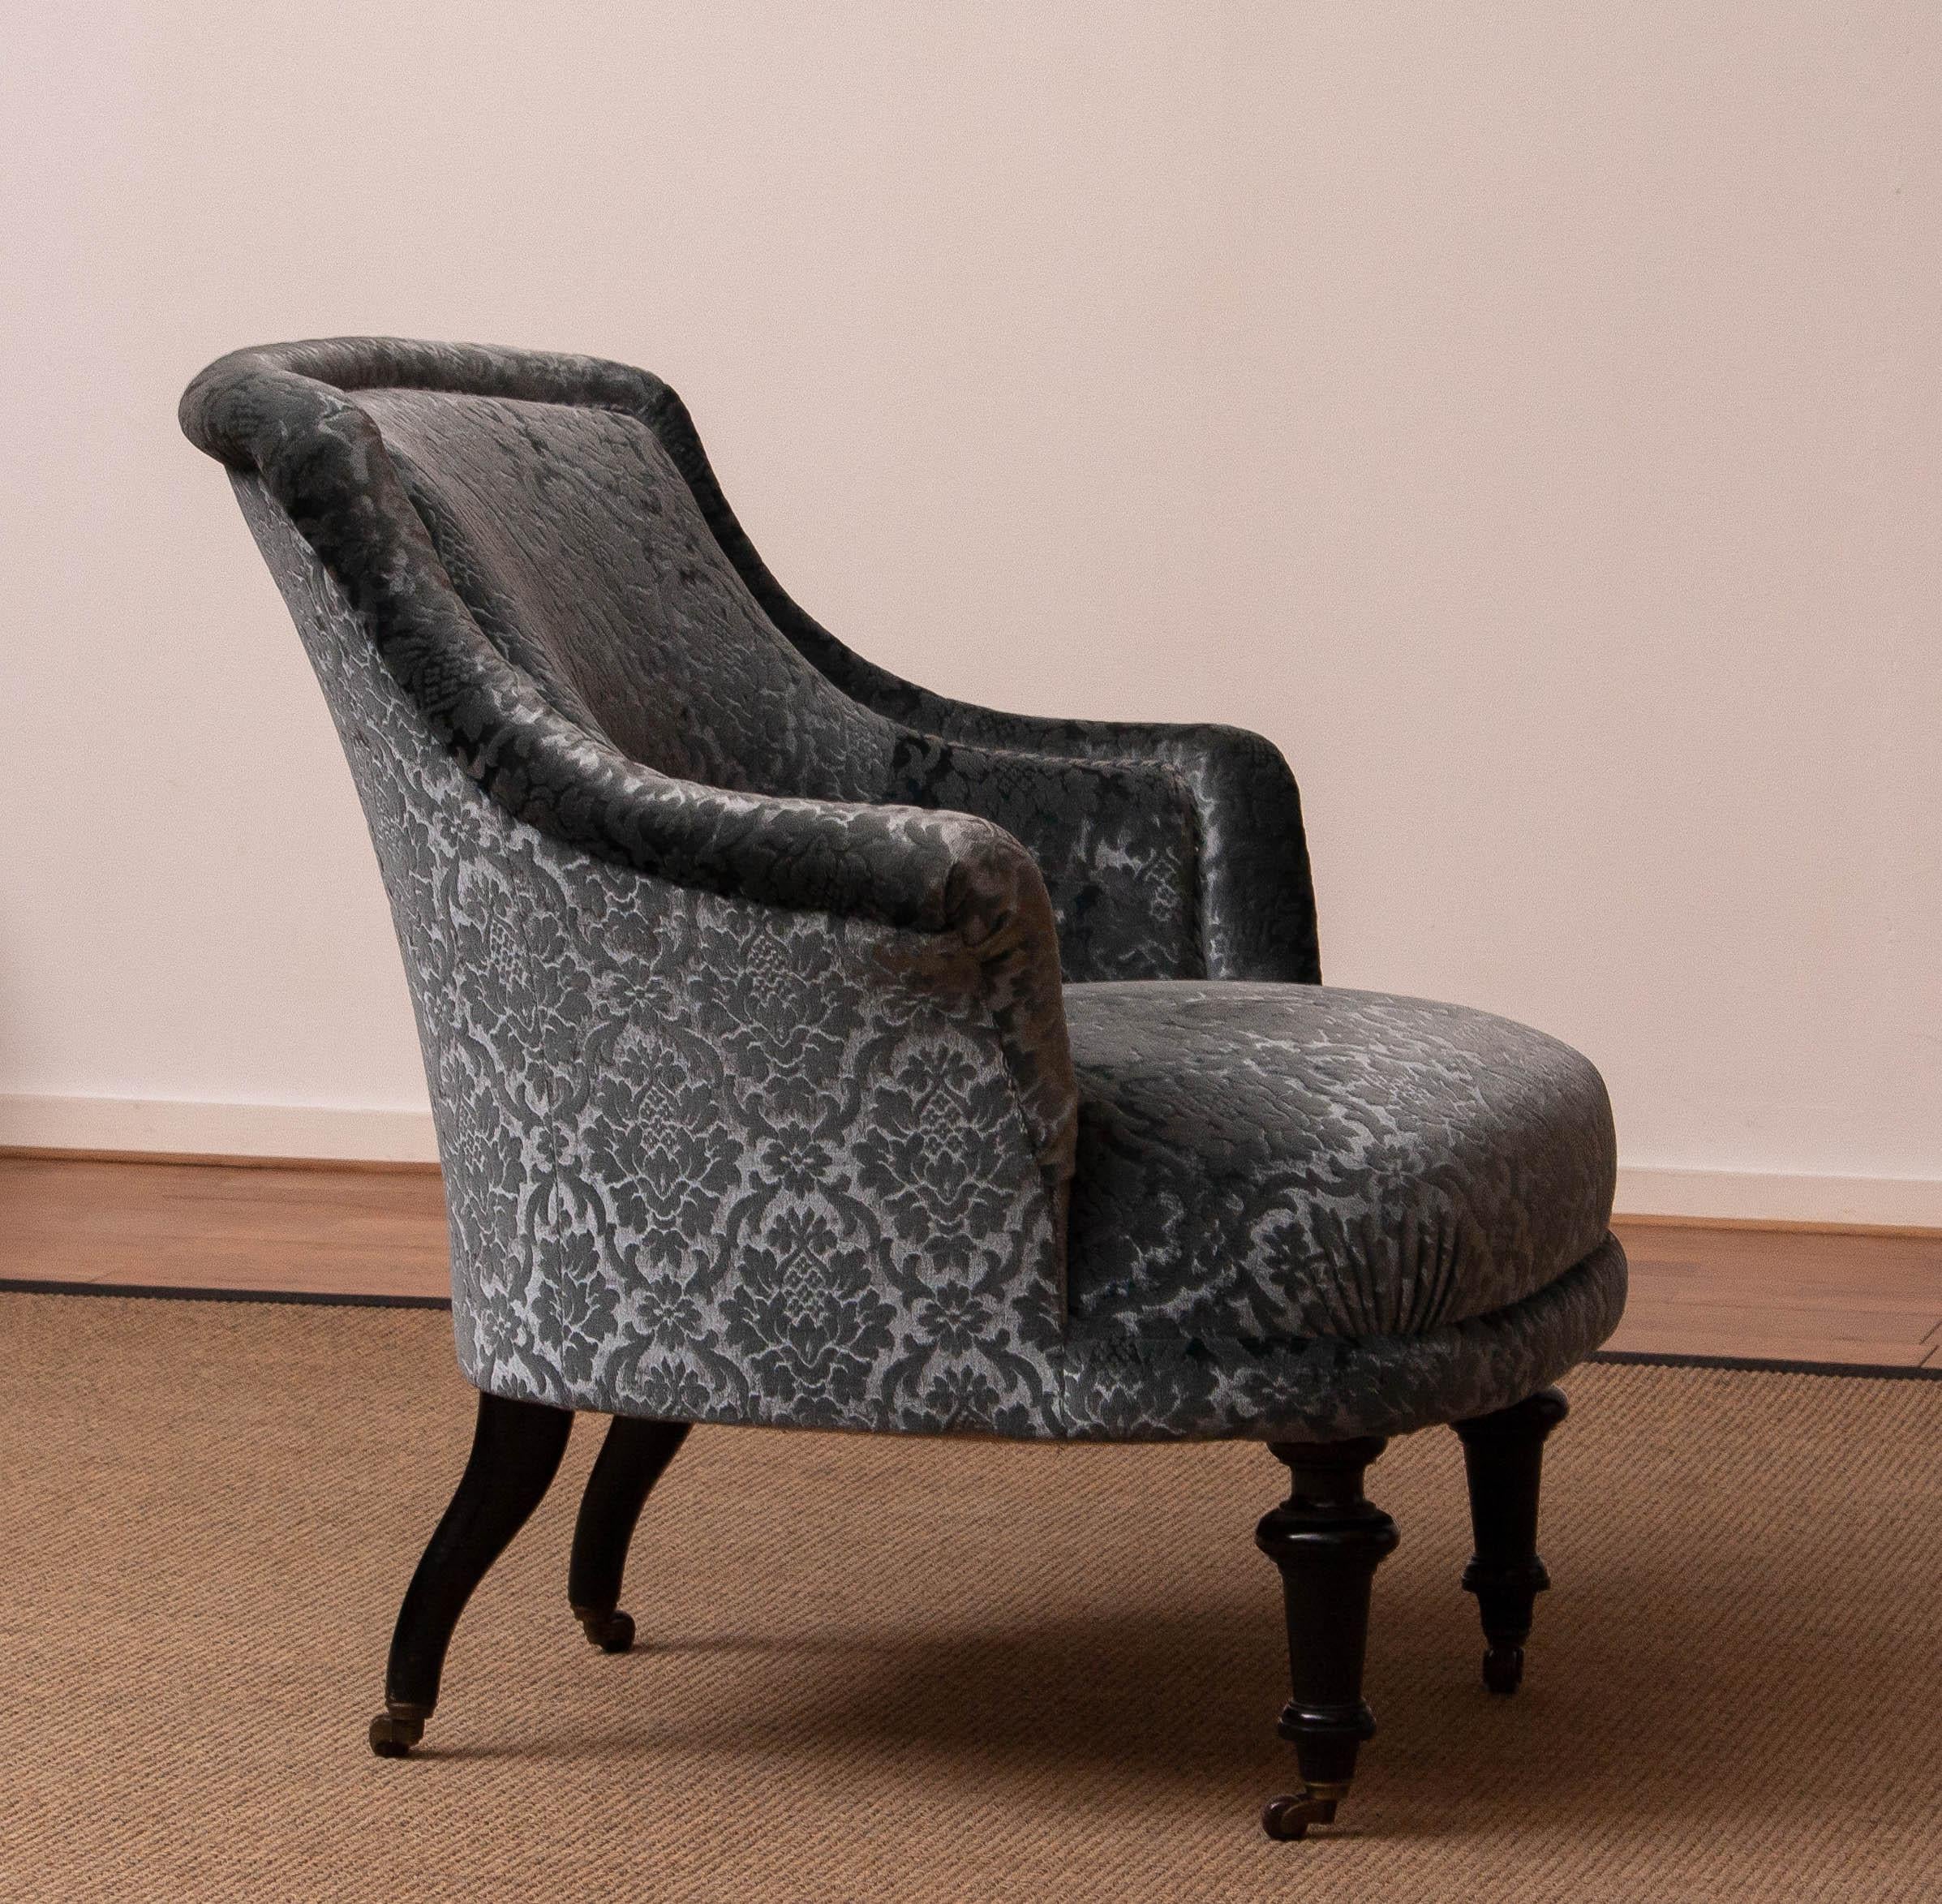 Beautiful Napoleon lll chair.
This chair is totally reupholstered with a grey velvet jacquard fabric and new bindings.
It has black wooden legs with castors.
The chair is in an excellent condition and combines classic design with modern glamour.